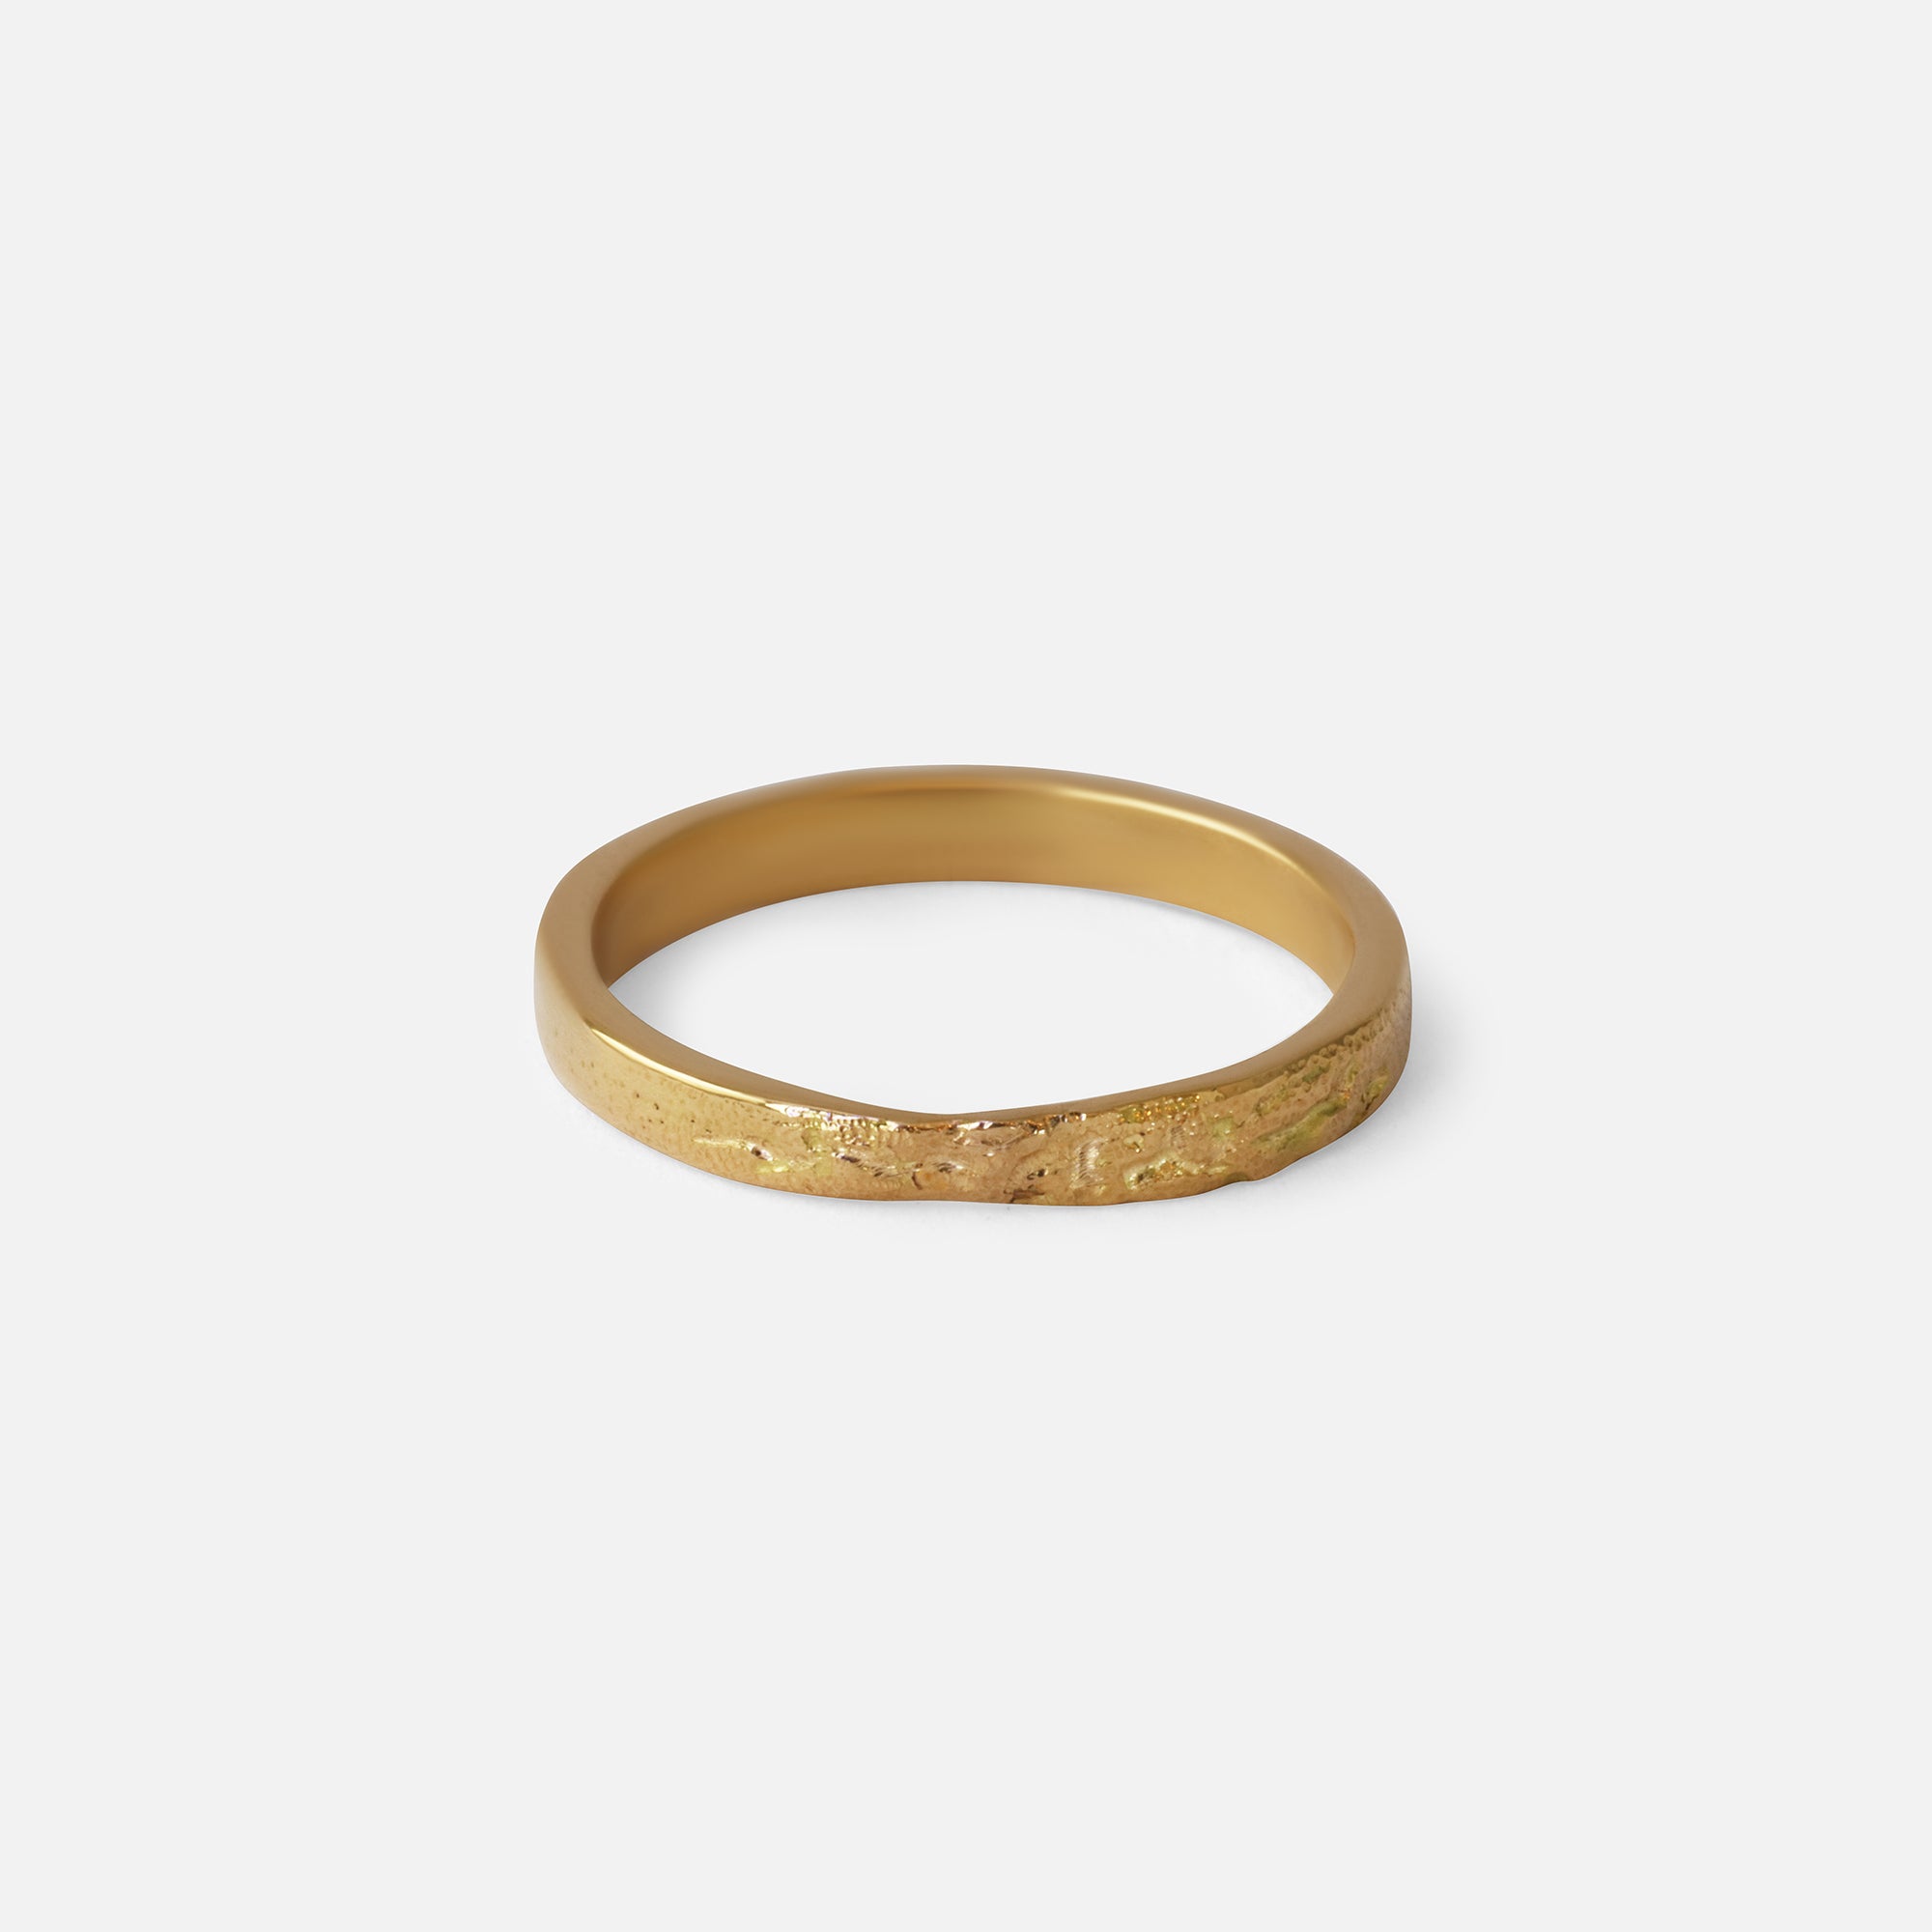 Stippled Stack Band By Young Sun Song in rings Category